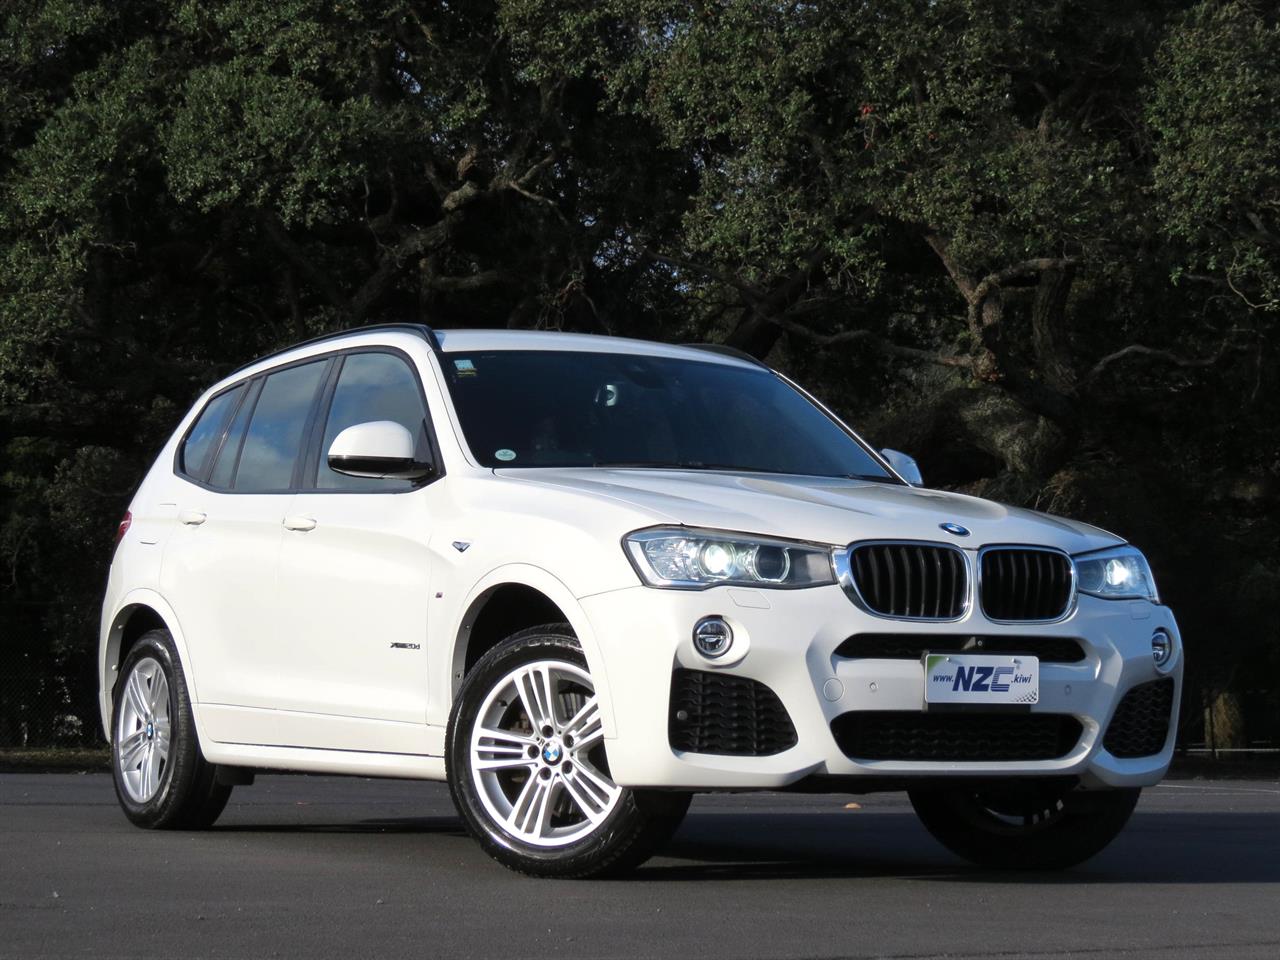 NZC 2015 BMW X3 just arrived to Auckland